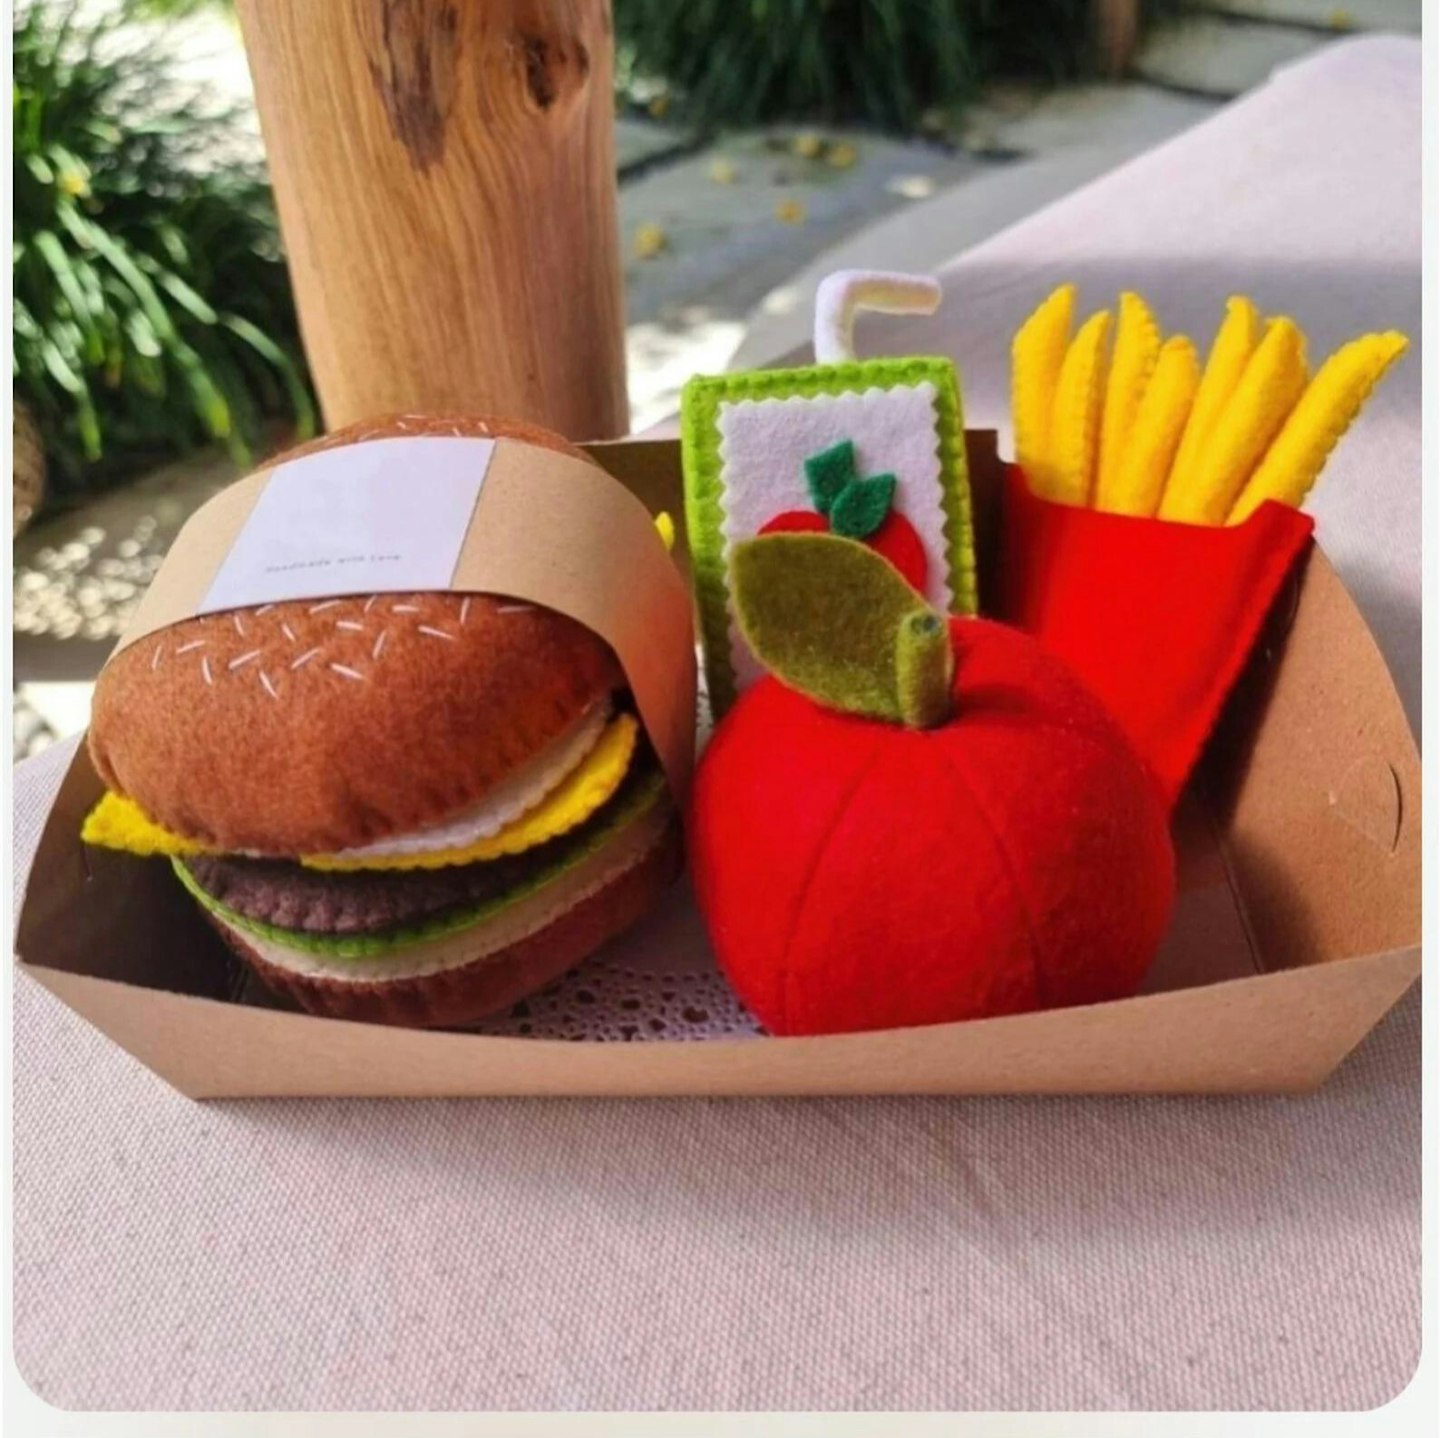 Happy Meal play food set made from felt with a burger and removable fillings, packet of removable chips, carton of apple juice and an apple in an eco-friendly cardboard container